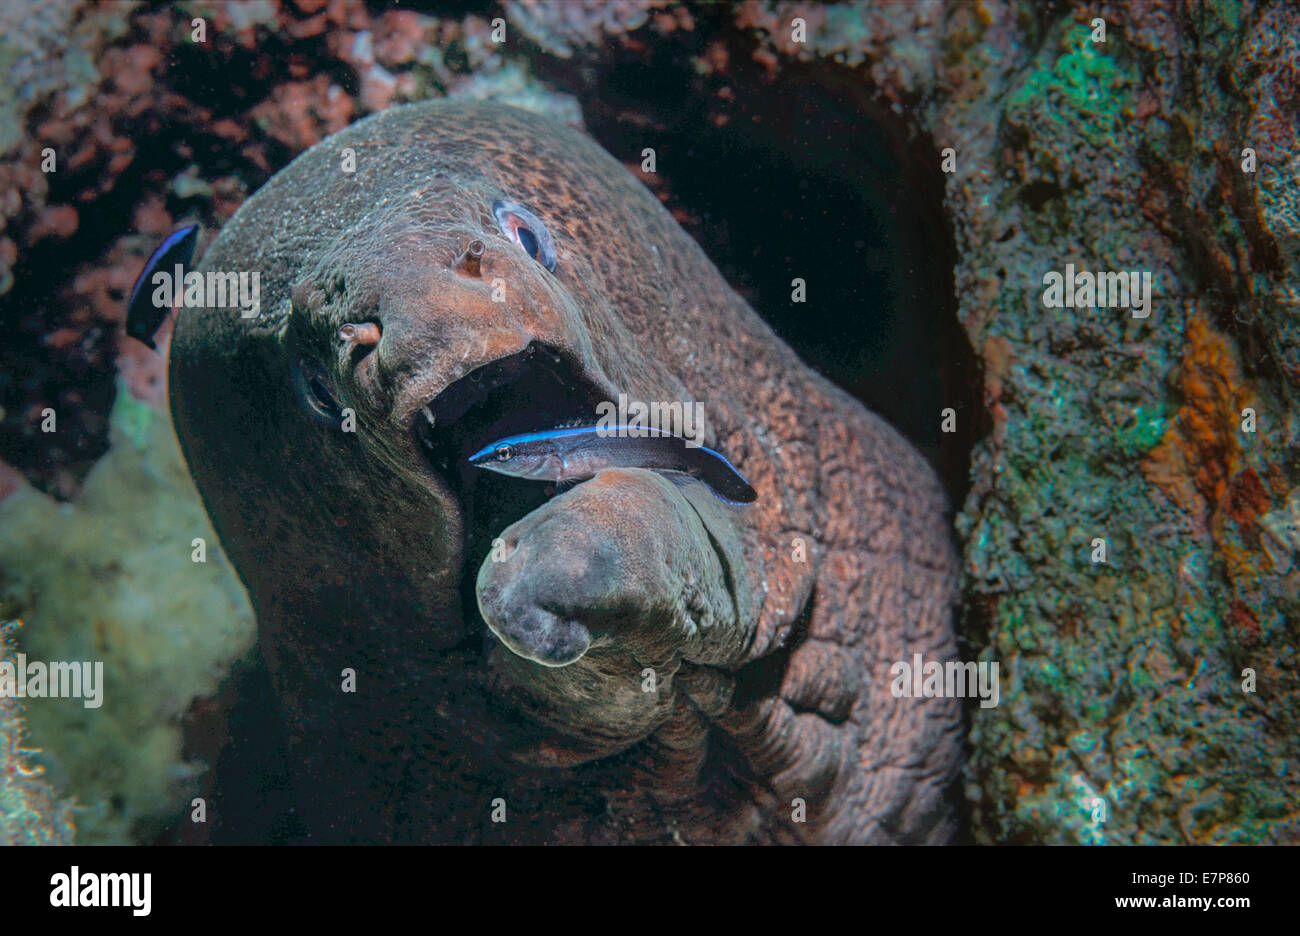 Giant Moray eel (Gymnothorax javanicus) cleaned by Bluestriped Cleaner Wrasses (Labroides dimidiatus), an example of a symbiotic Stock Photo